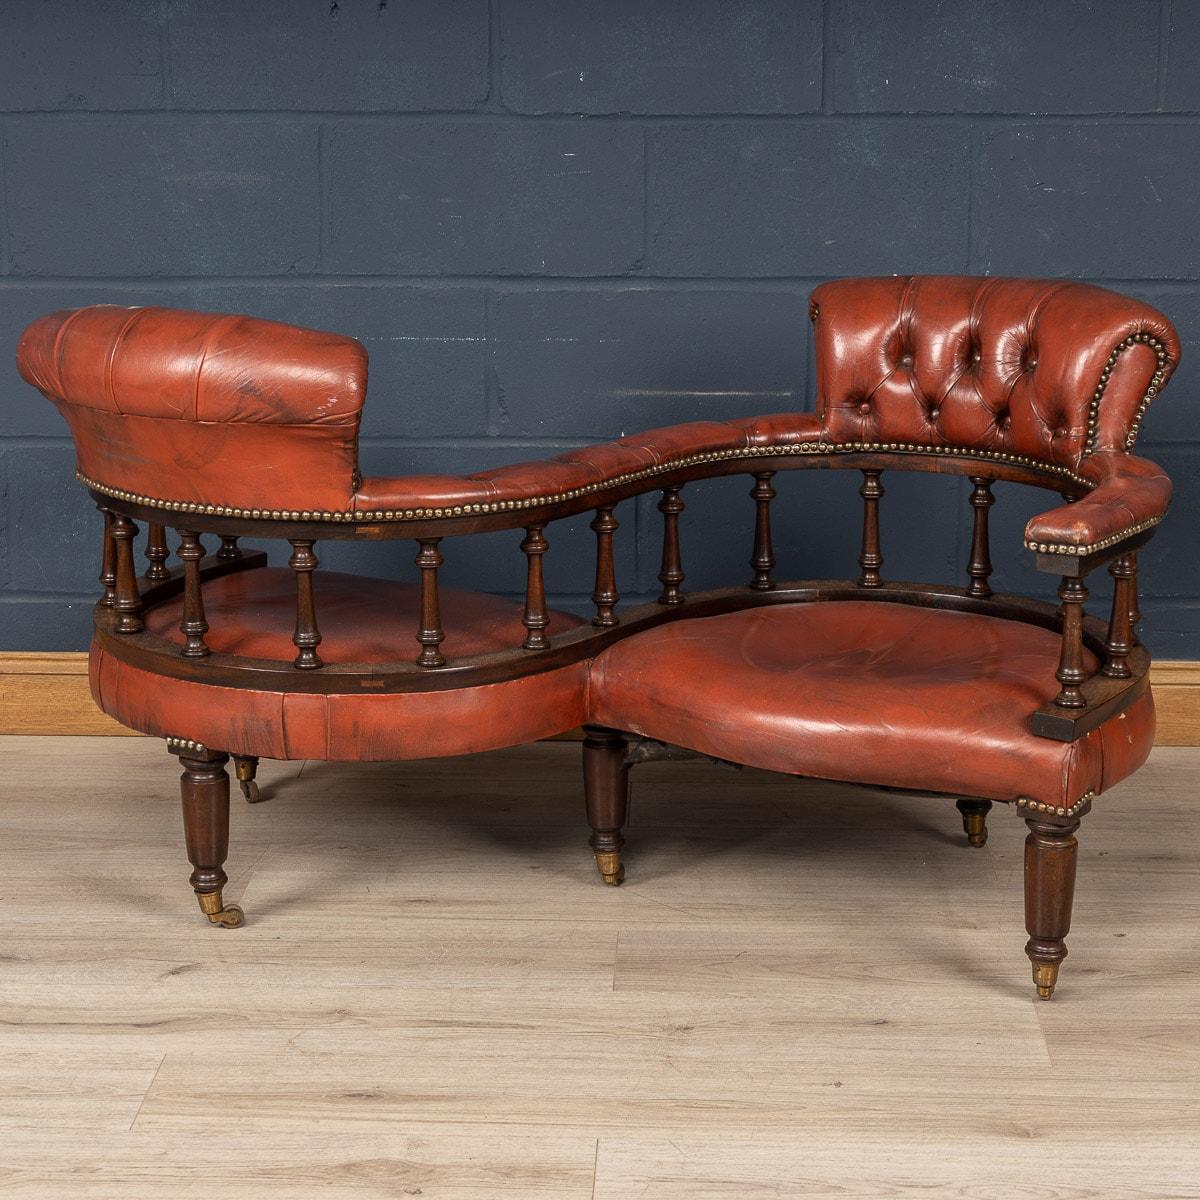 One of the most unusual chairs: a conversation seat or love seat, handmade in England and upholstered in the finest leather. Dating to the middle of the last century, its fluid S curve frame, button down seating and mahogany legs make this item a